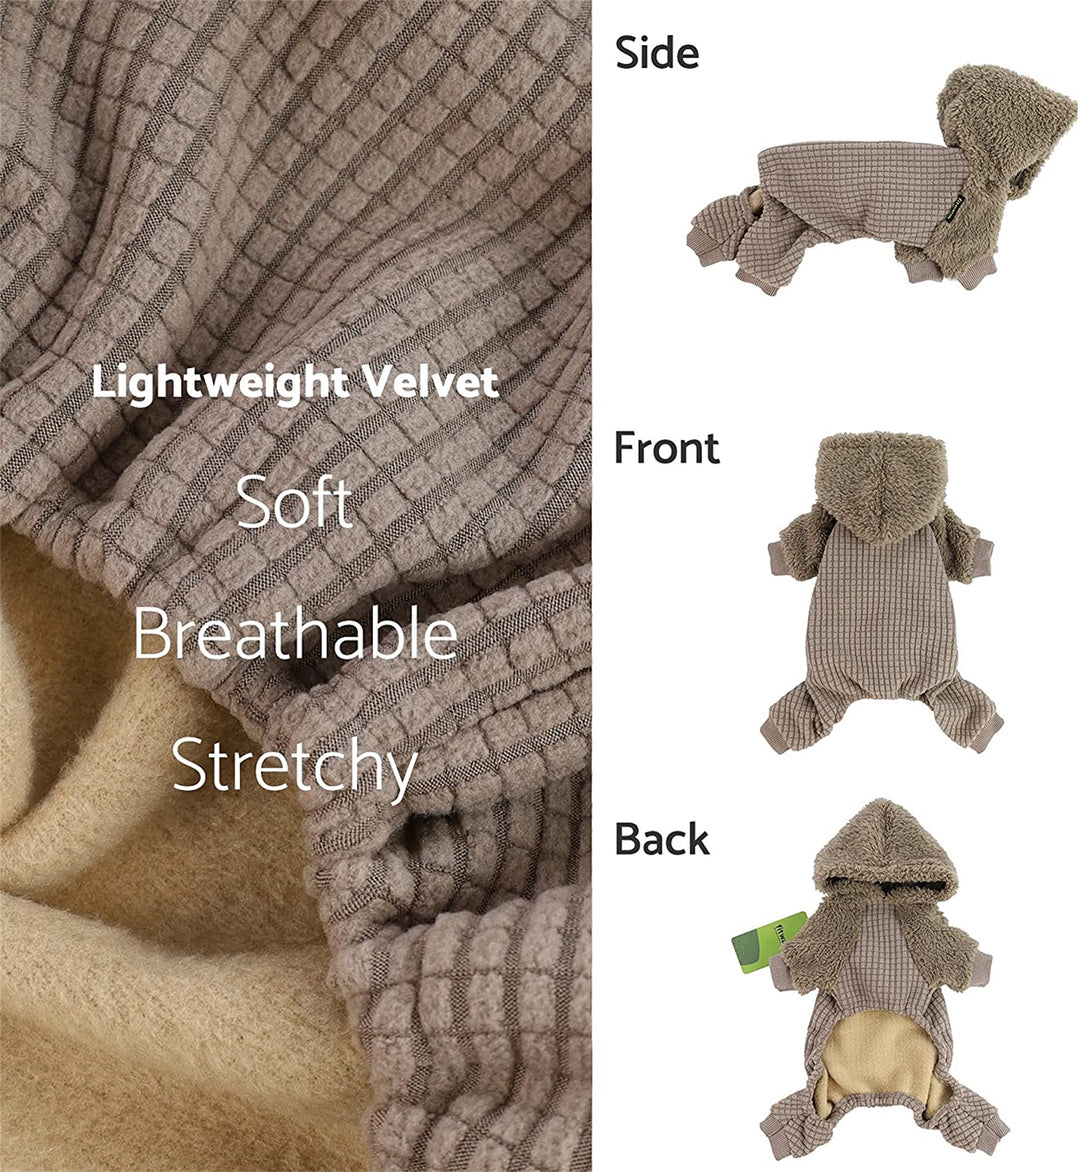 Fuzzy Velvet Hooded Jumpsuit Brownclothes for dogs